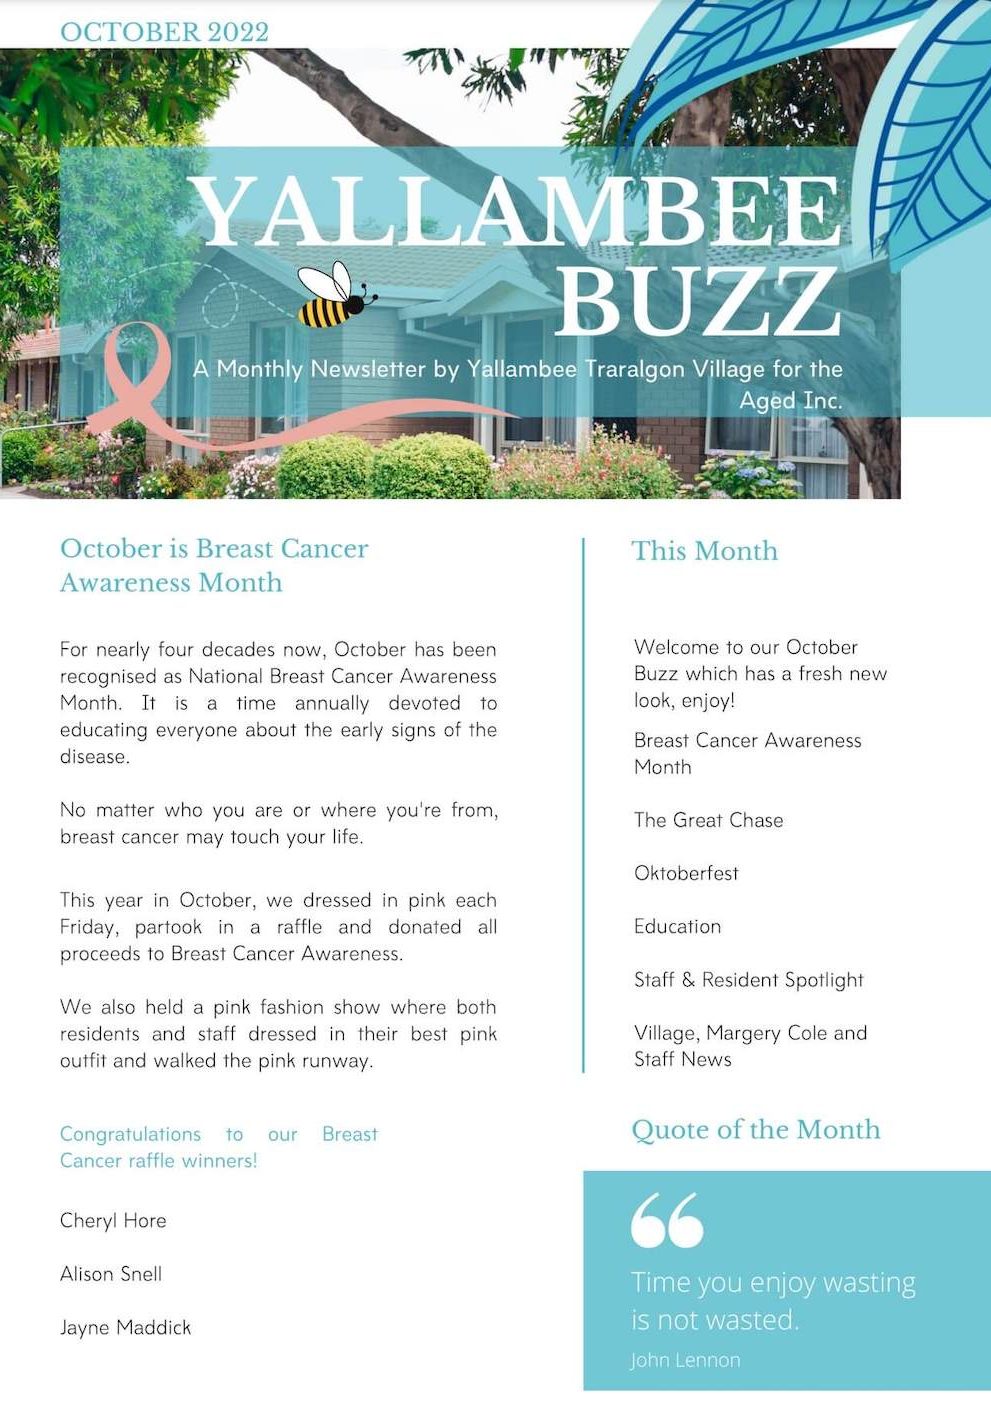 Screenshot of the cover of the October 2022 Yallambee Buzz newsletter.